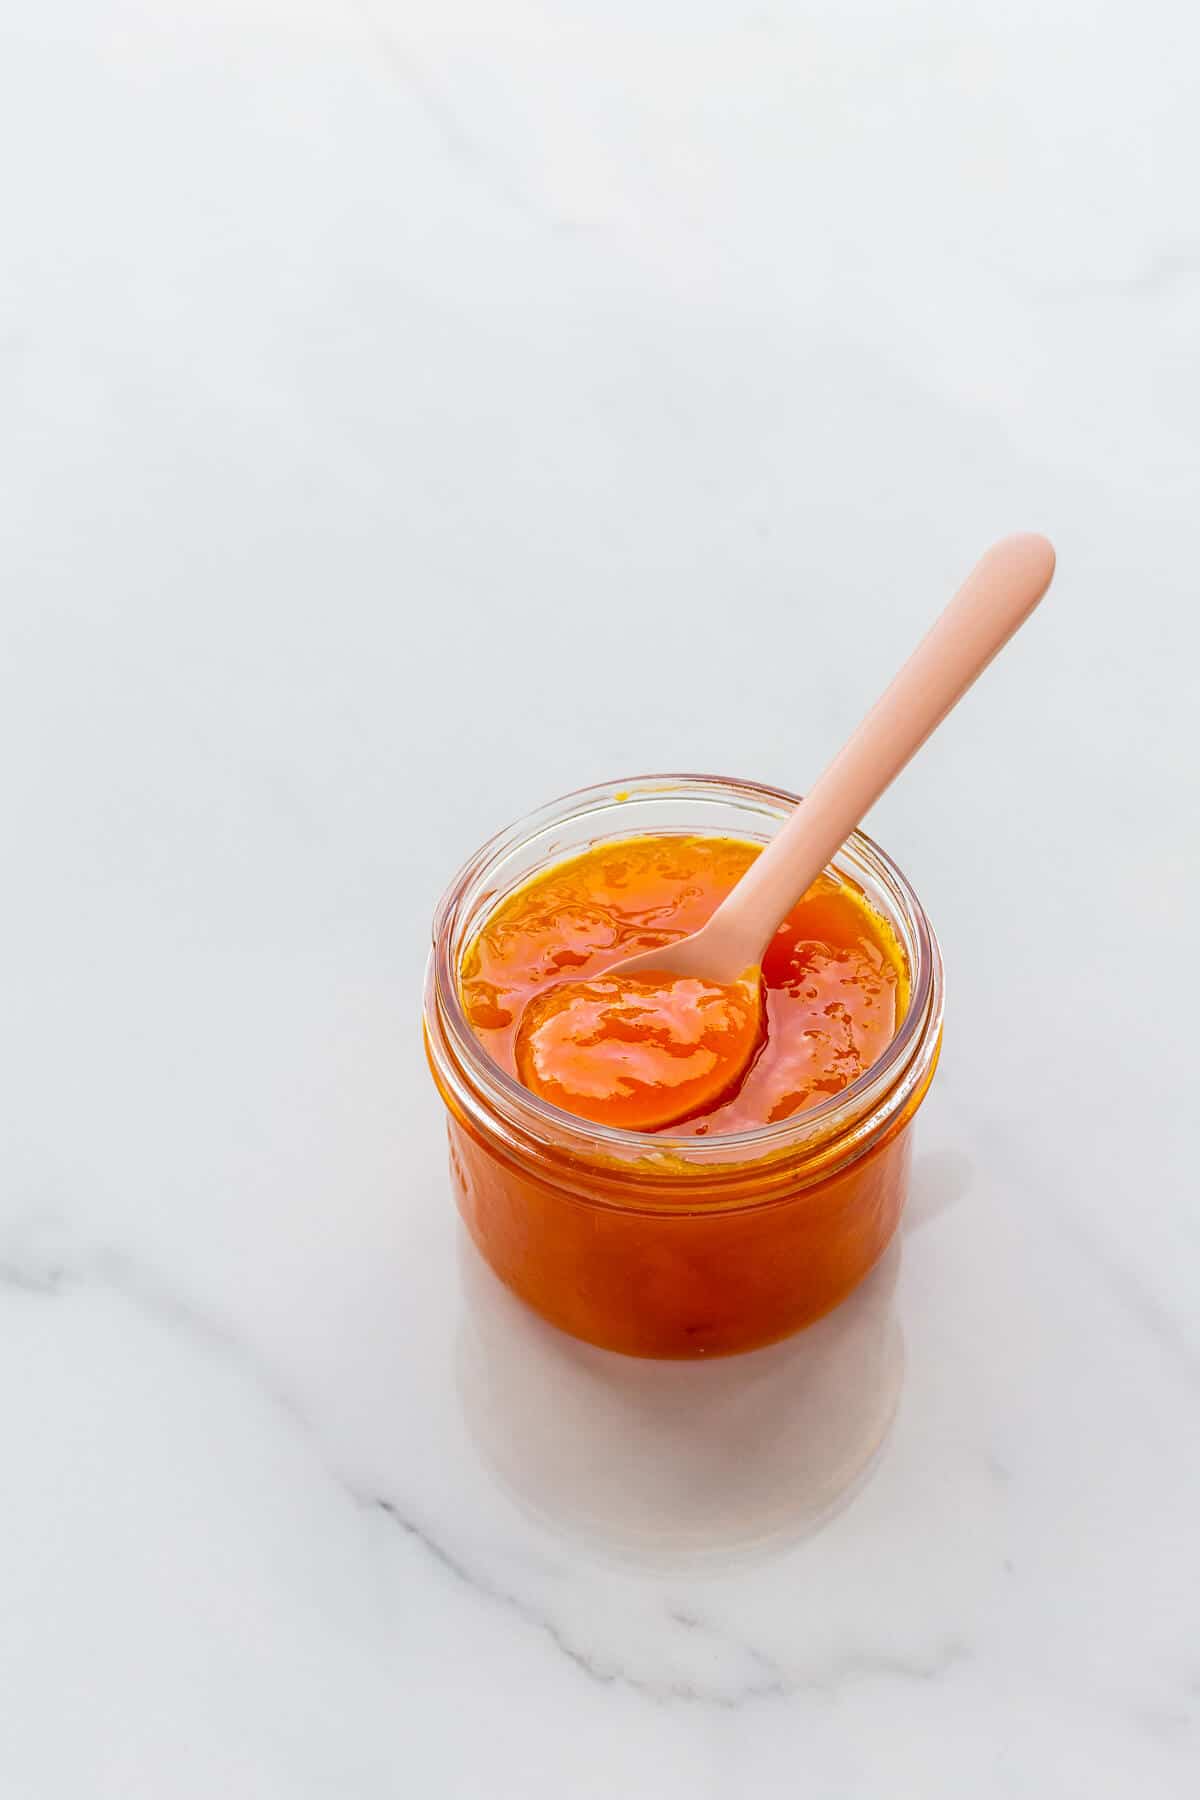 A jar of apricot jam with a spoon.